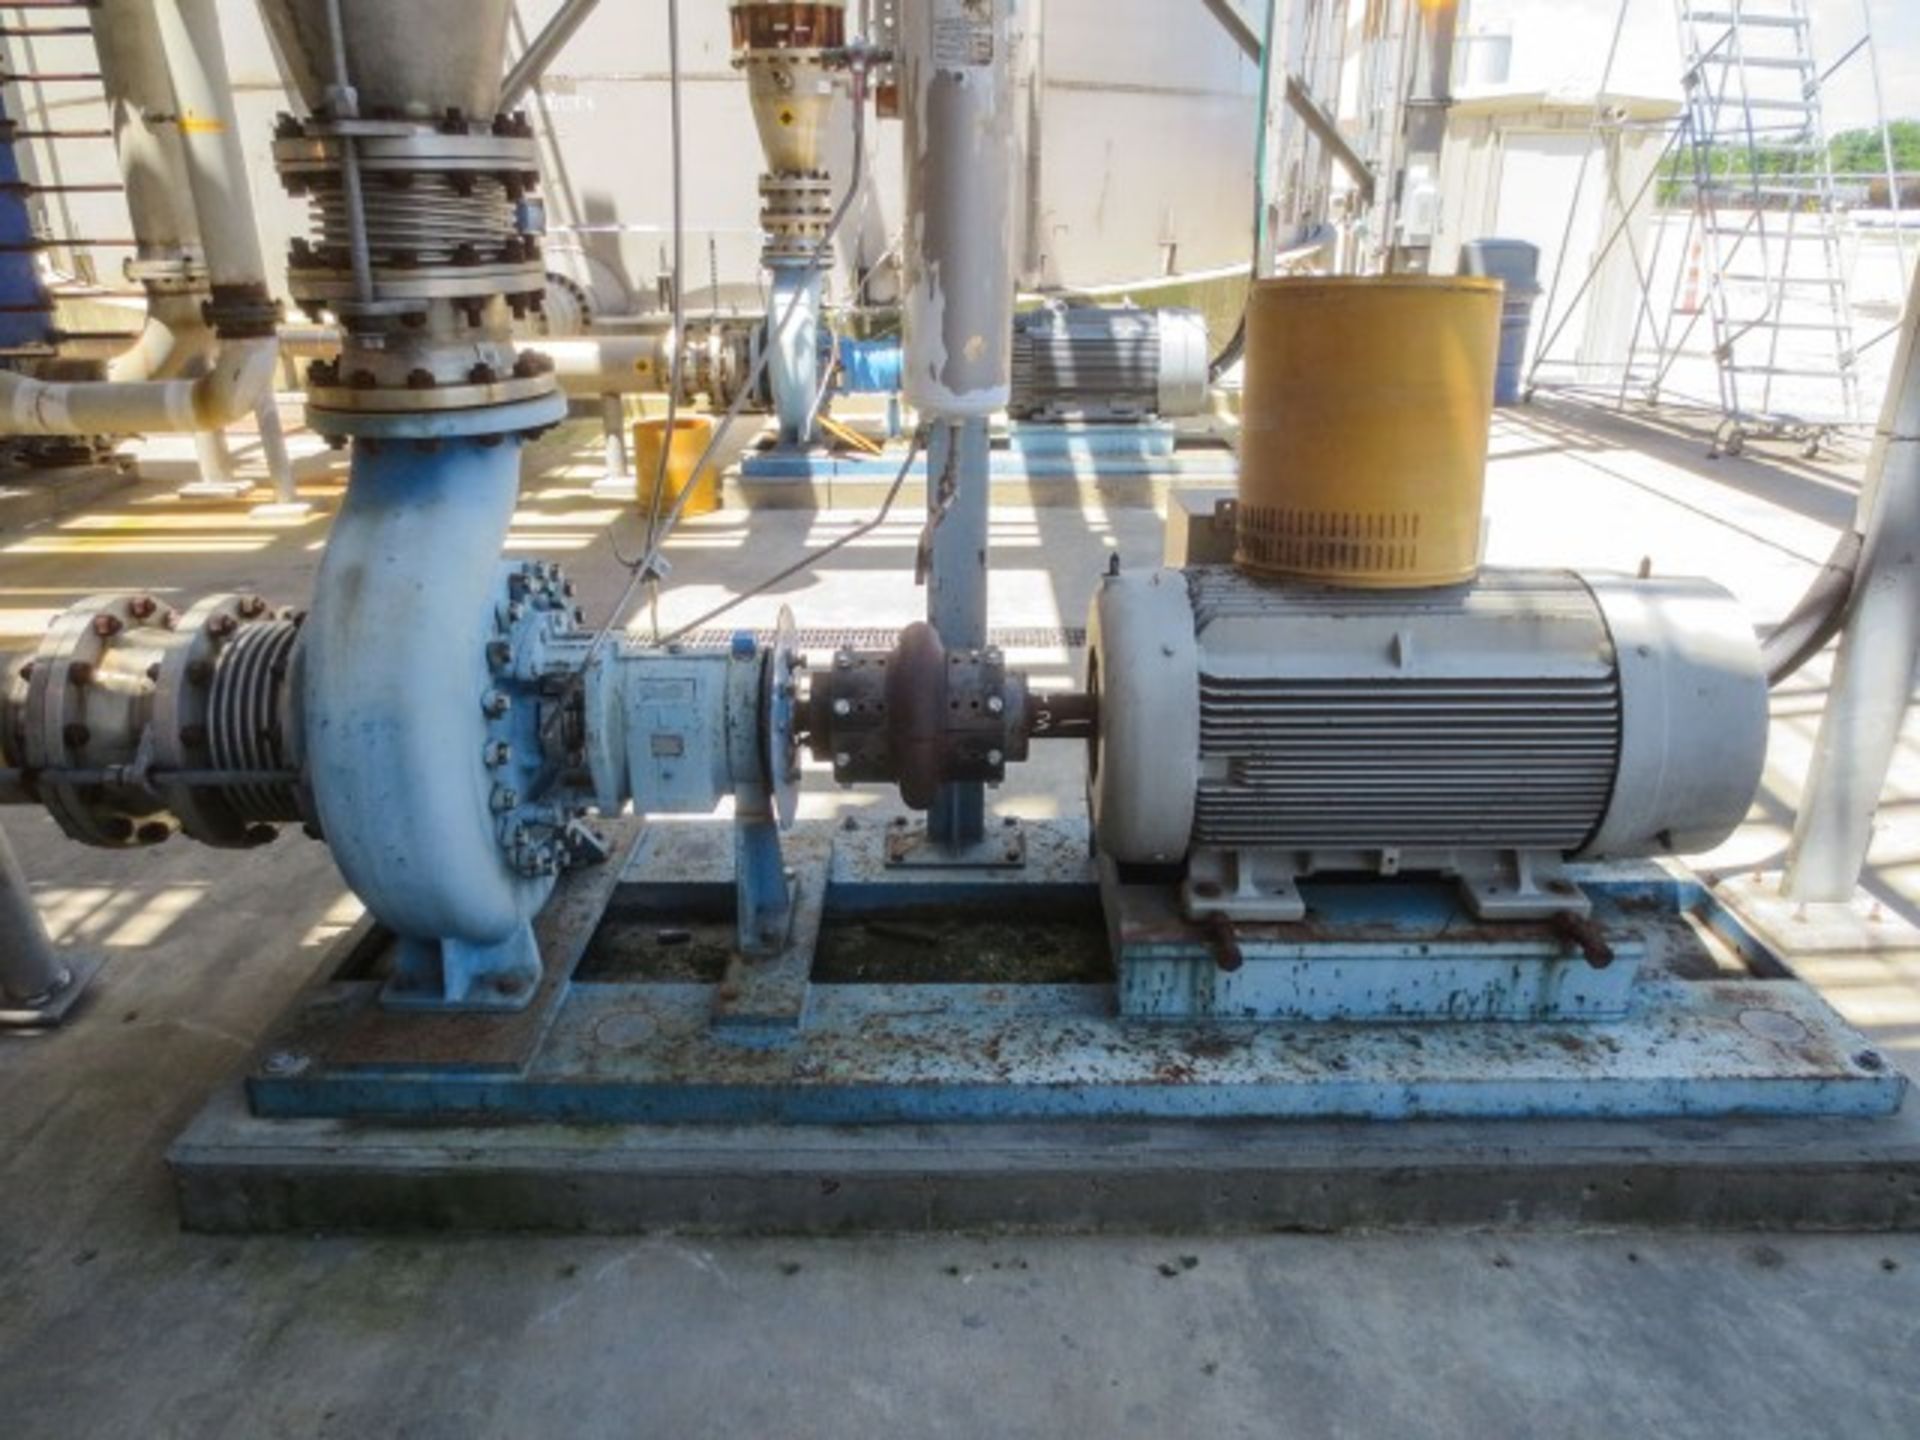 Goulds centrifugal pump, model 3180L. Size 10X12-19 with impeller dia Rigging/Loading Fee: $1000